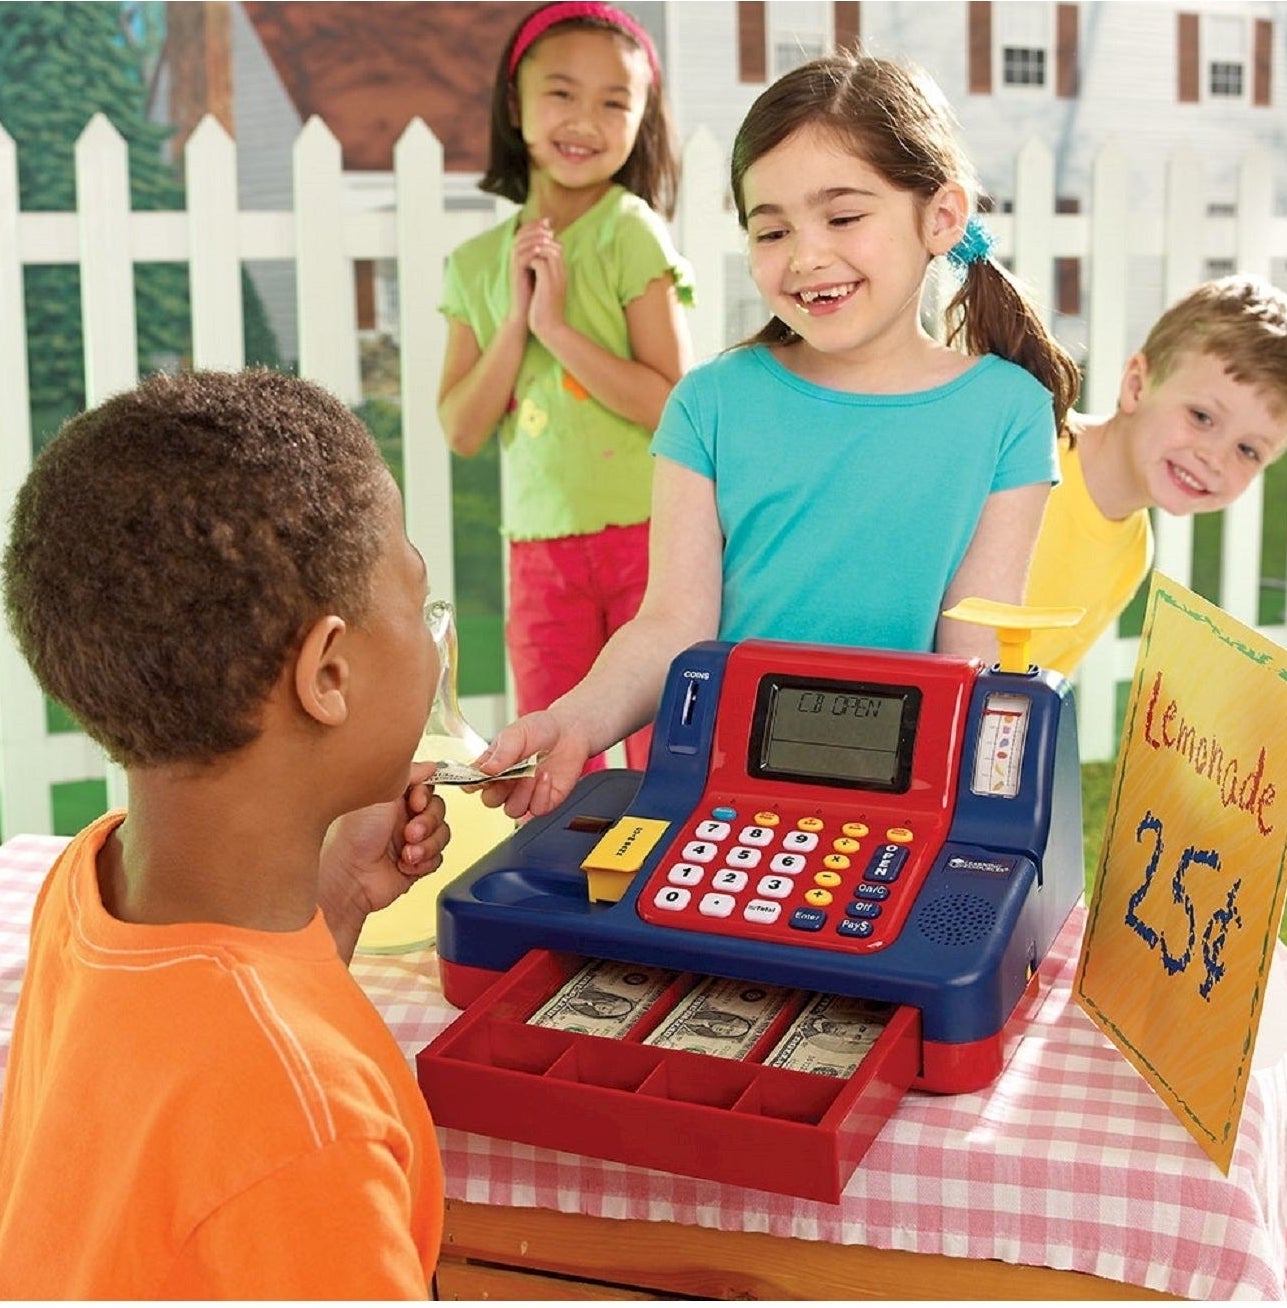 Kids playing with a cash register